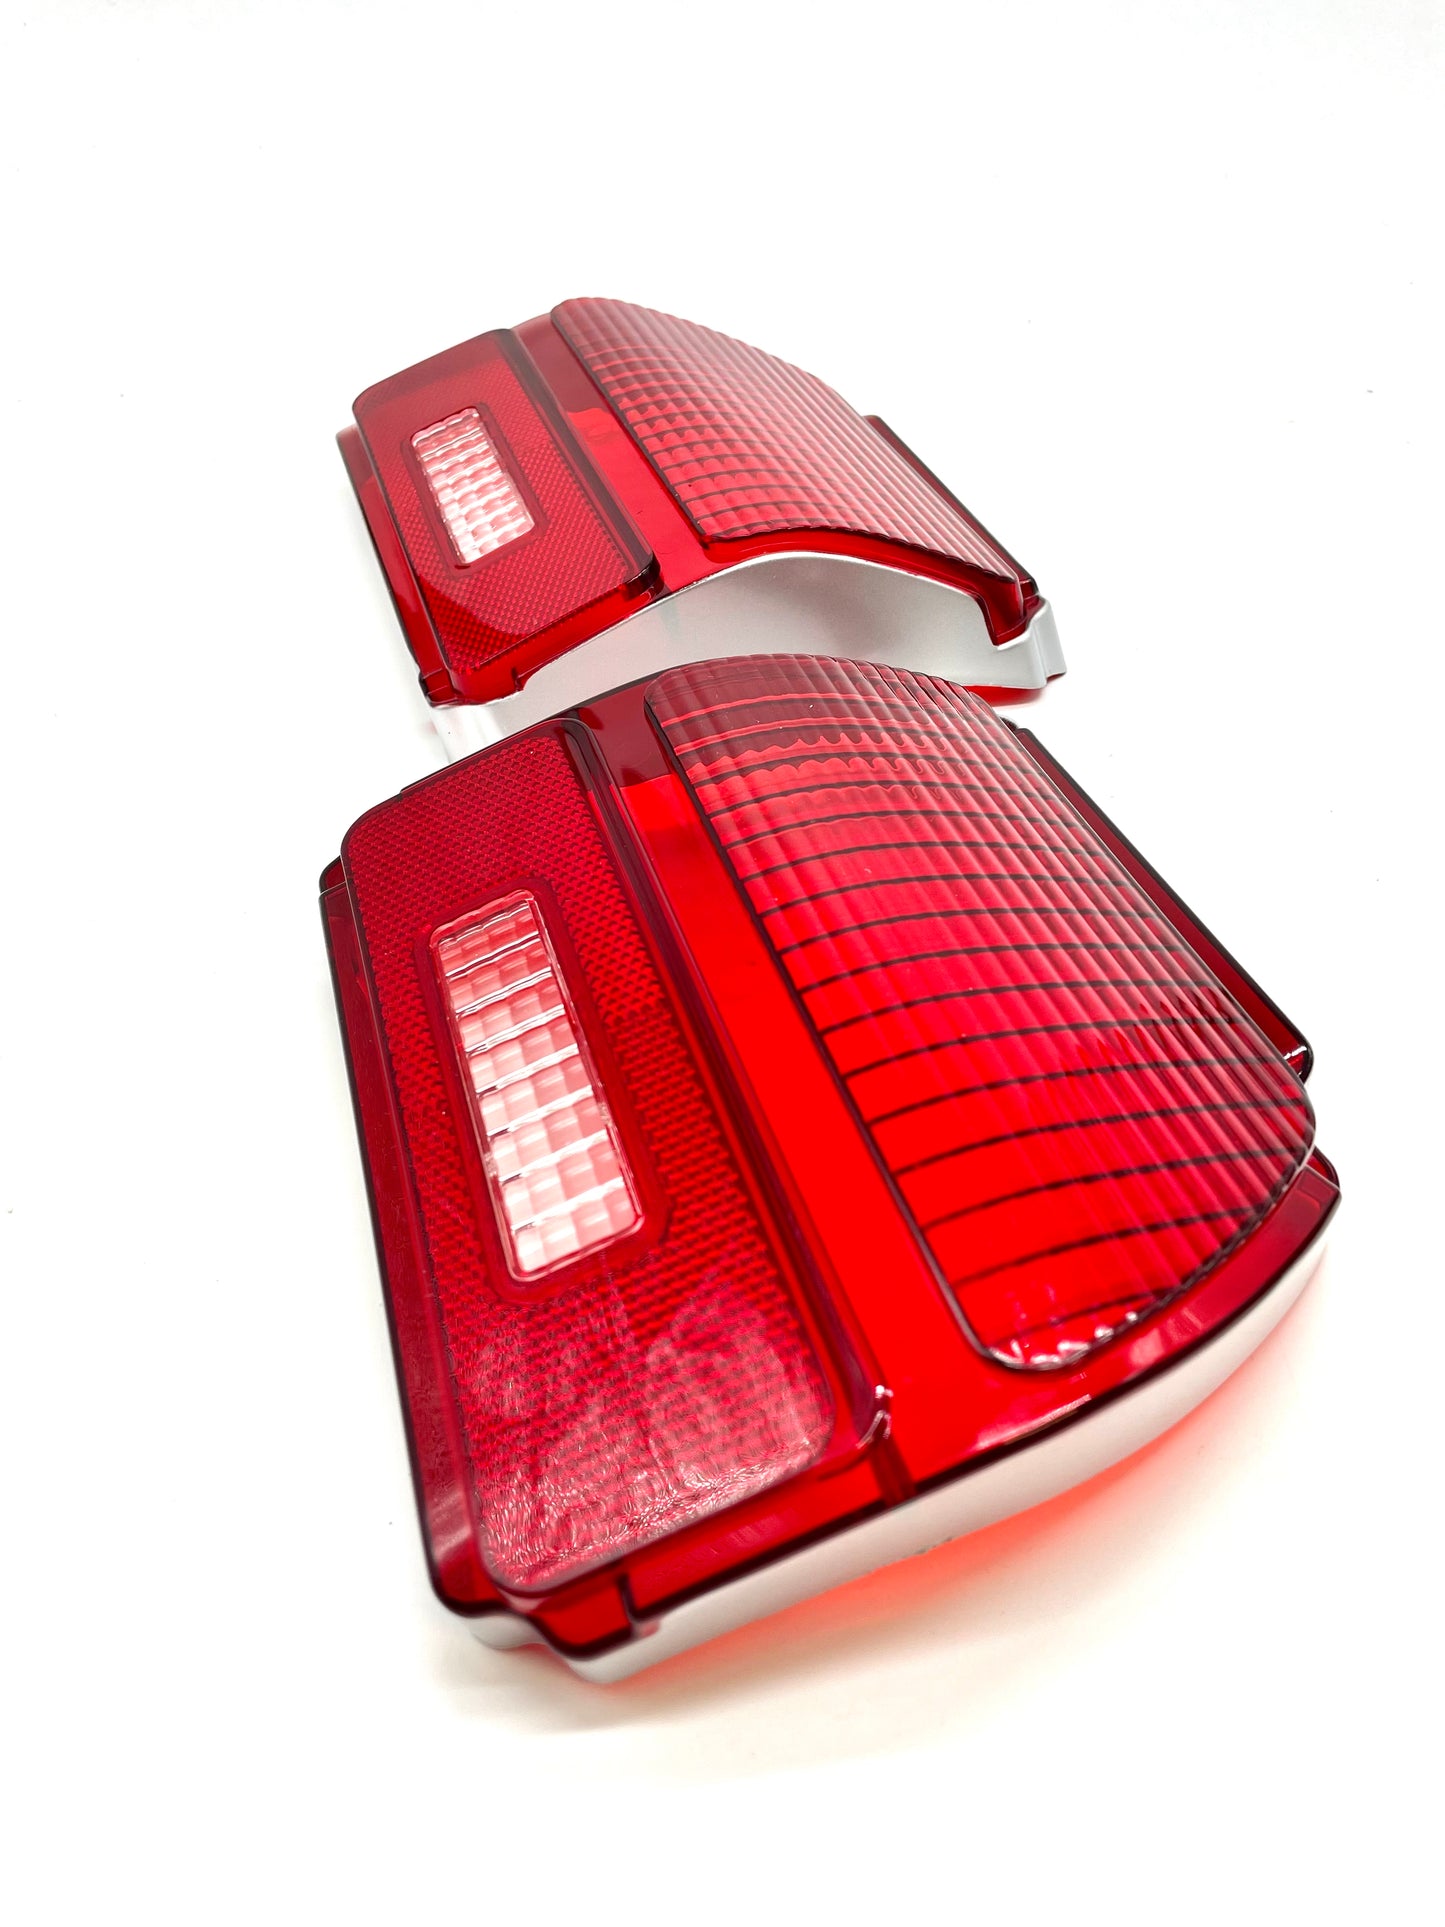 1969 Chevelle Taillight Lens, Sold in pairs